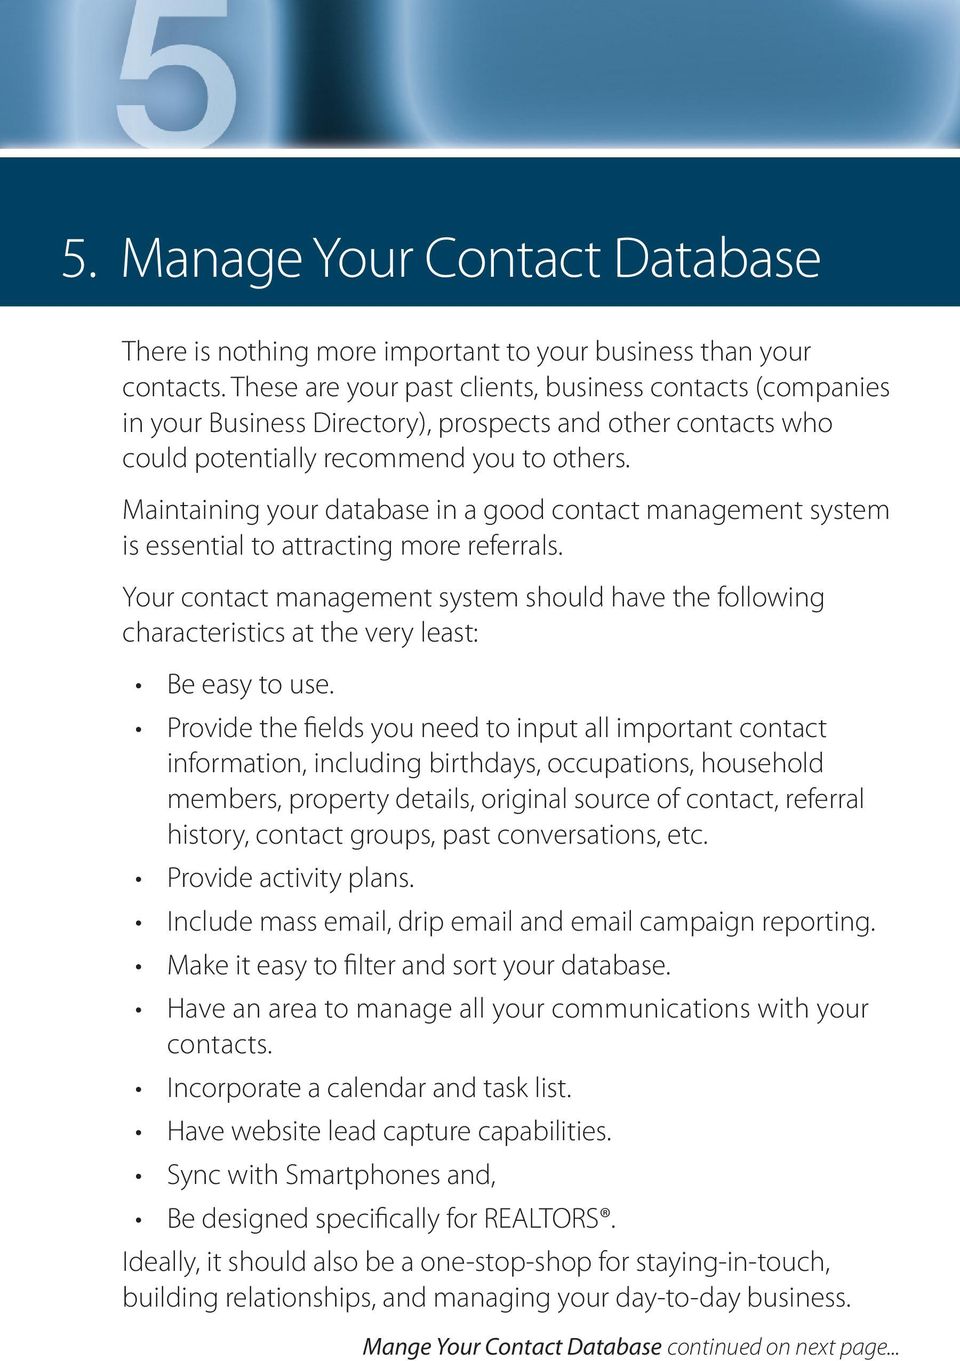 Maintaining your database in a good contact management system is essential to attracting more referrals.